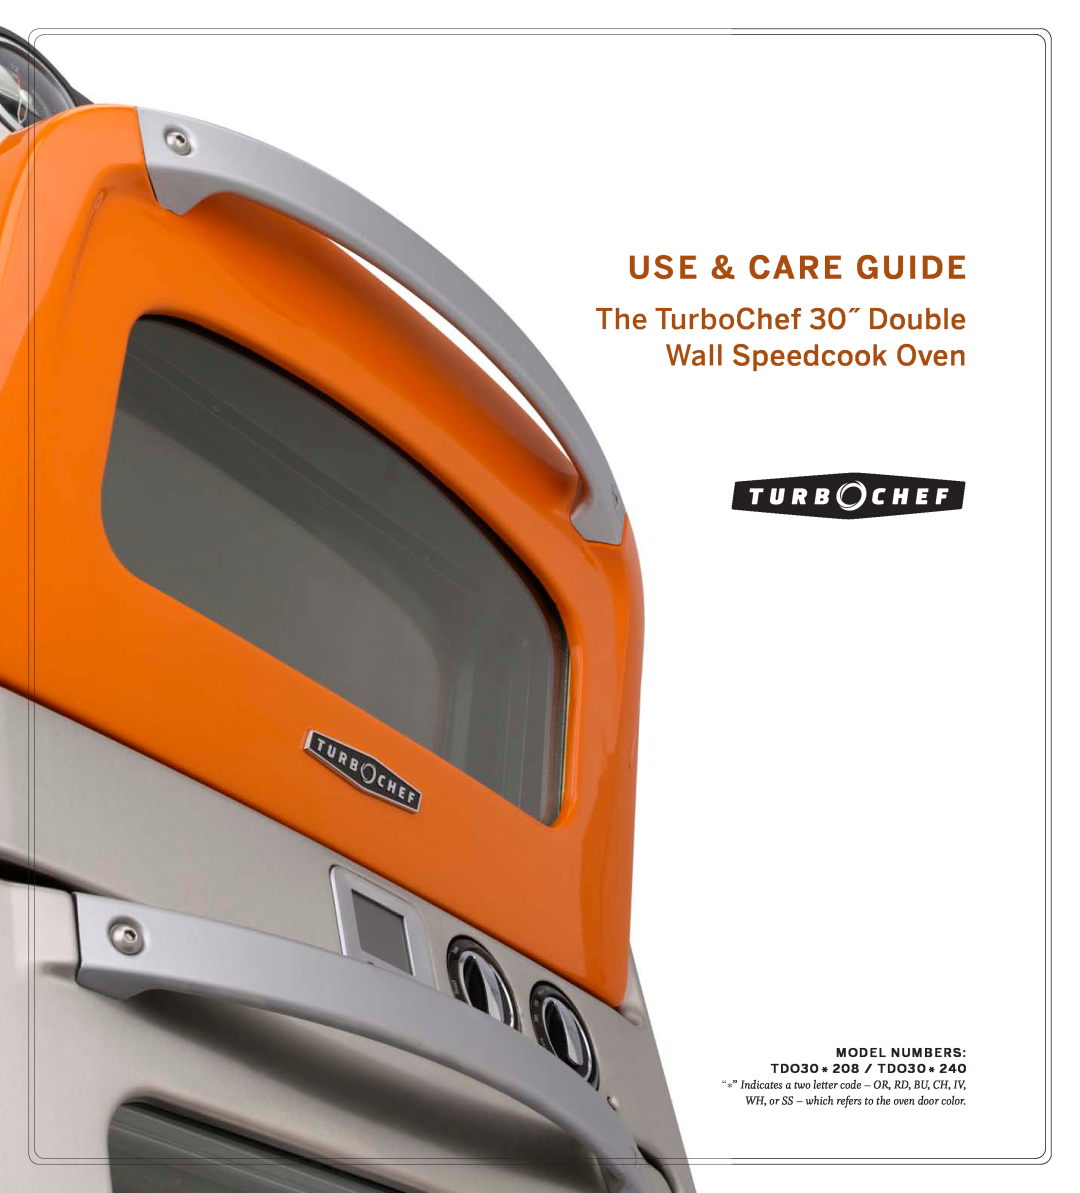 Turbo Chef Technologies TD030*240, TD030*208 manual Use & Care Guide, The TurboChef 30˝ Double Wall Speedcook Oven 